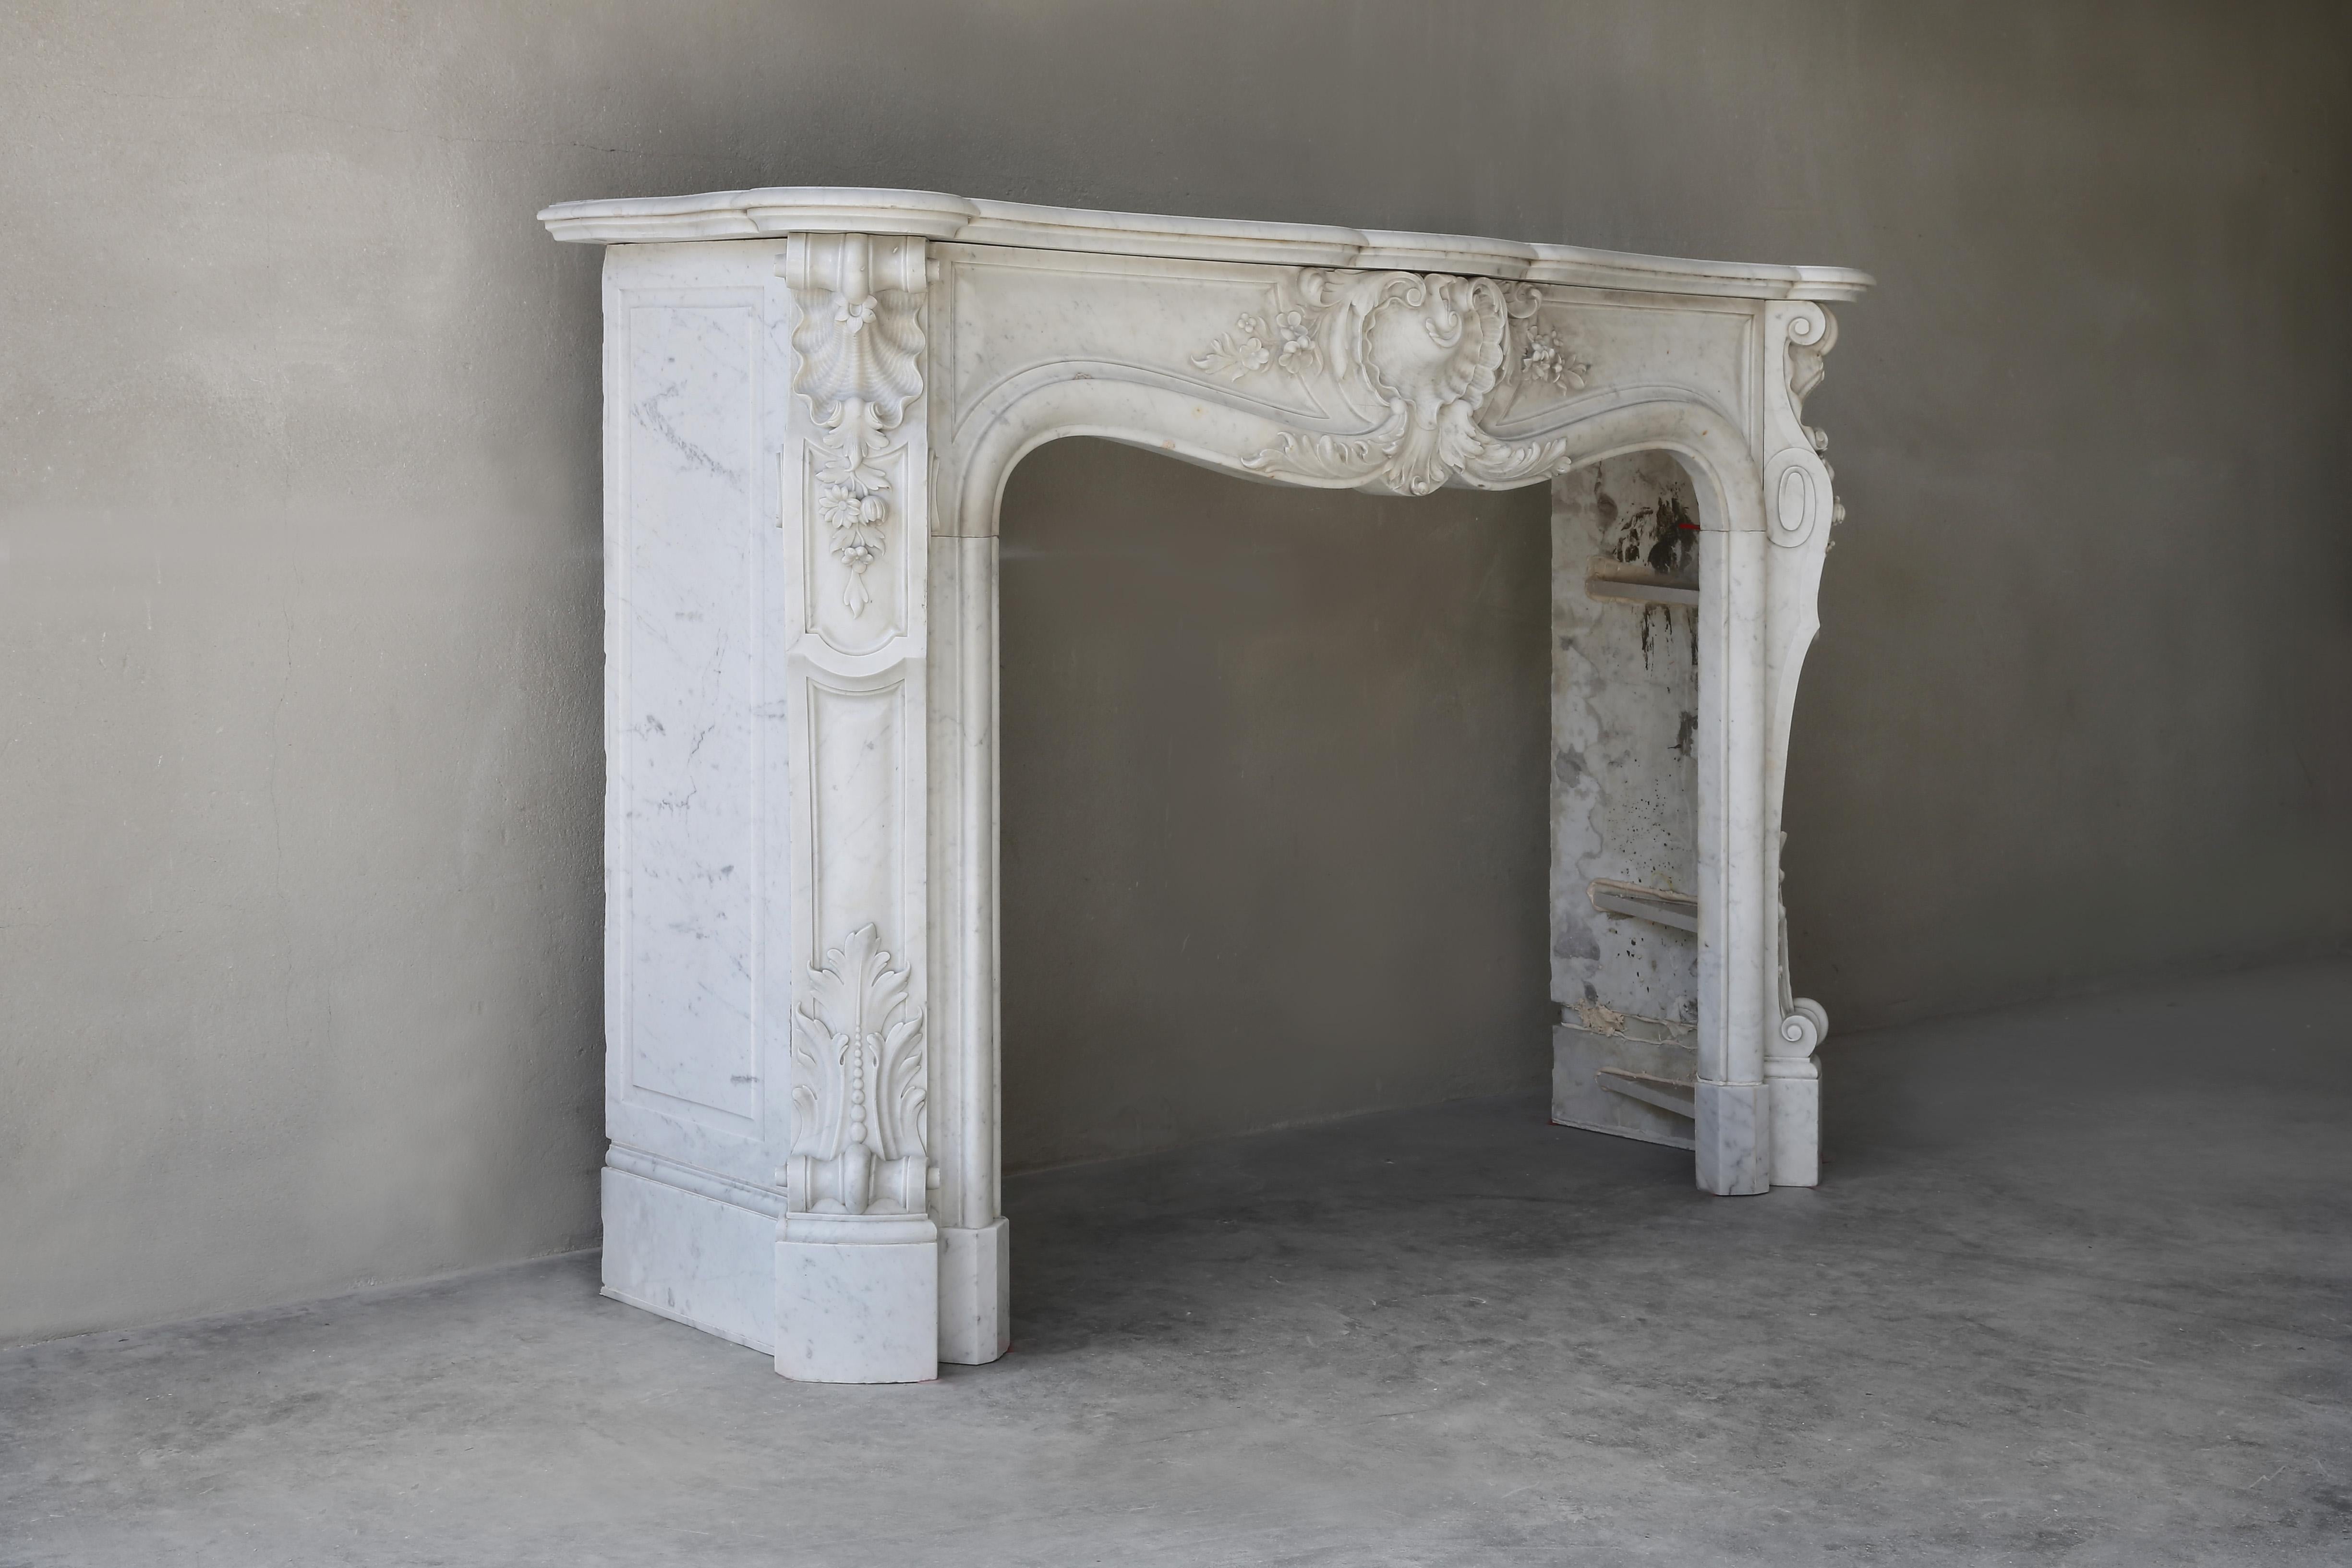 Very beautiful antique fireplace in Carrara marble from the 19th century in the style of Louis XV. A fireplace with beautiful decorations and ornaments, a scallop in the middle and on the legs. A special mantel (fireplace) with Fine chiselling and